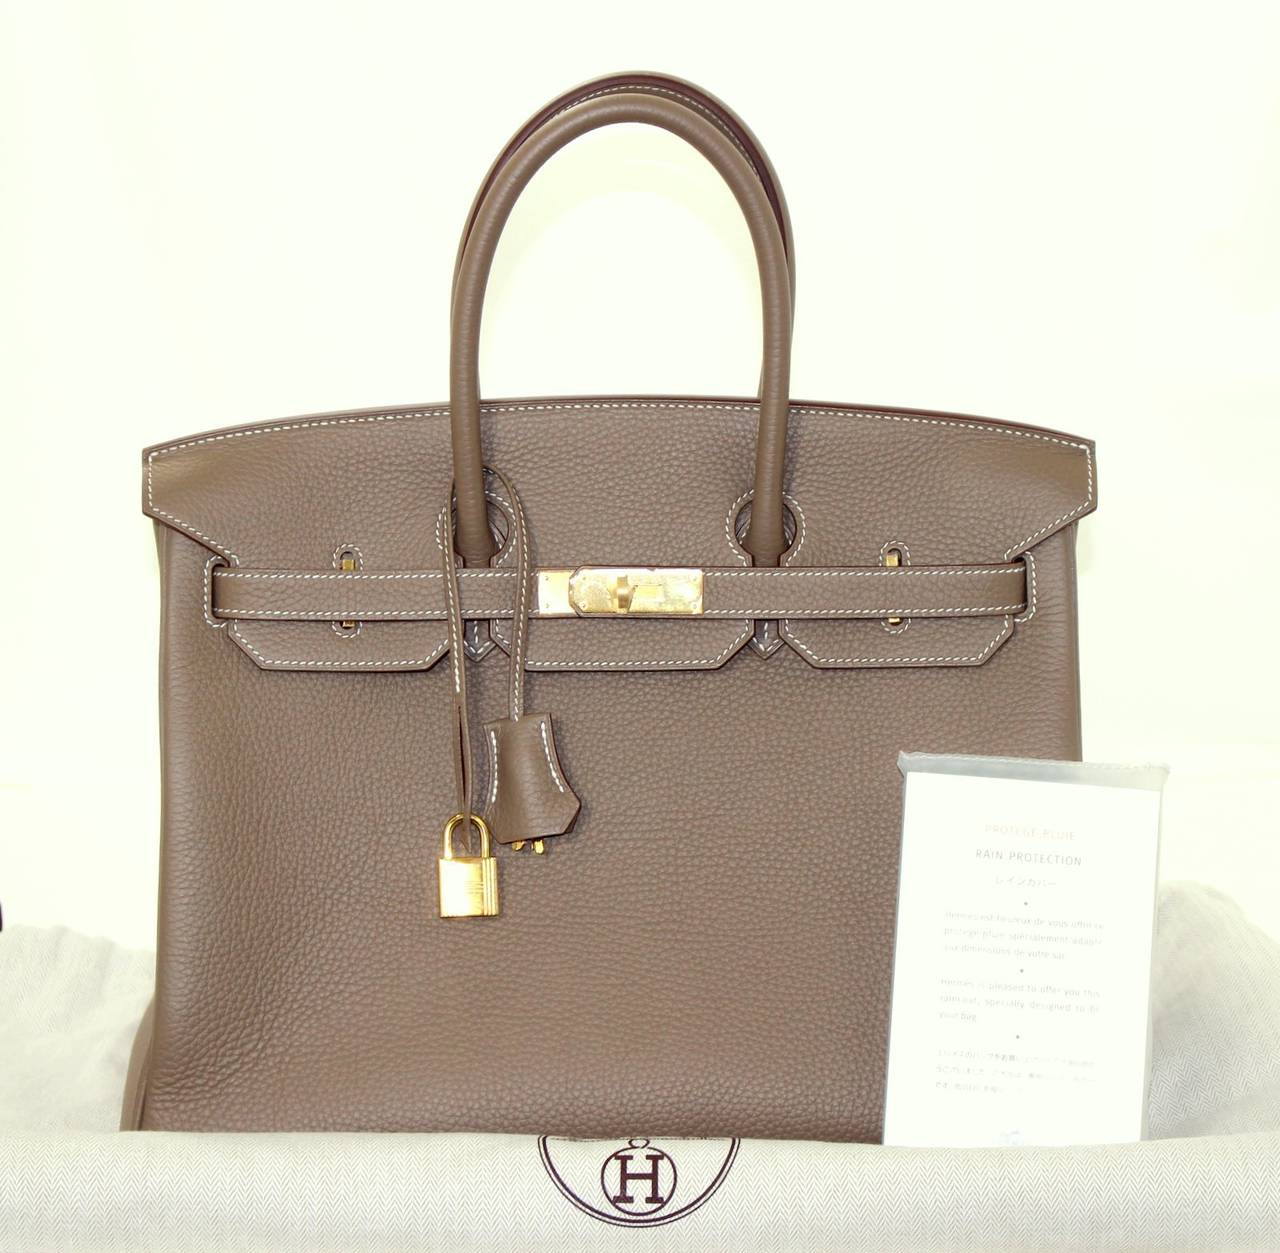 HERMES Etoupe Clemence Birkin Bag- Taupe Color with Gold HW 35 cm 3